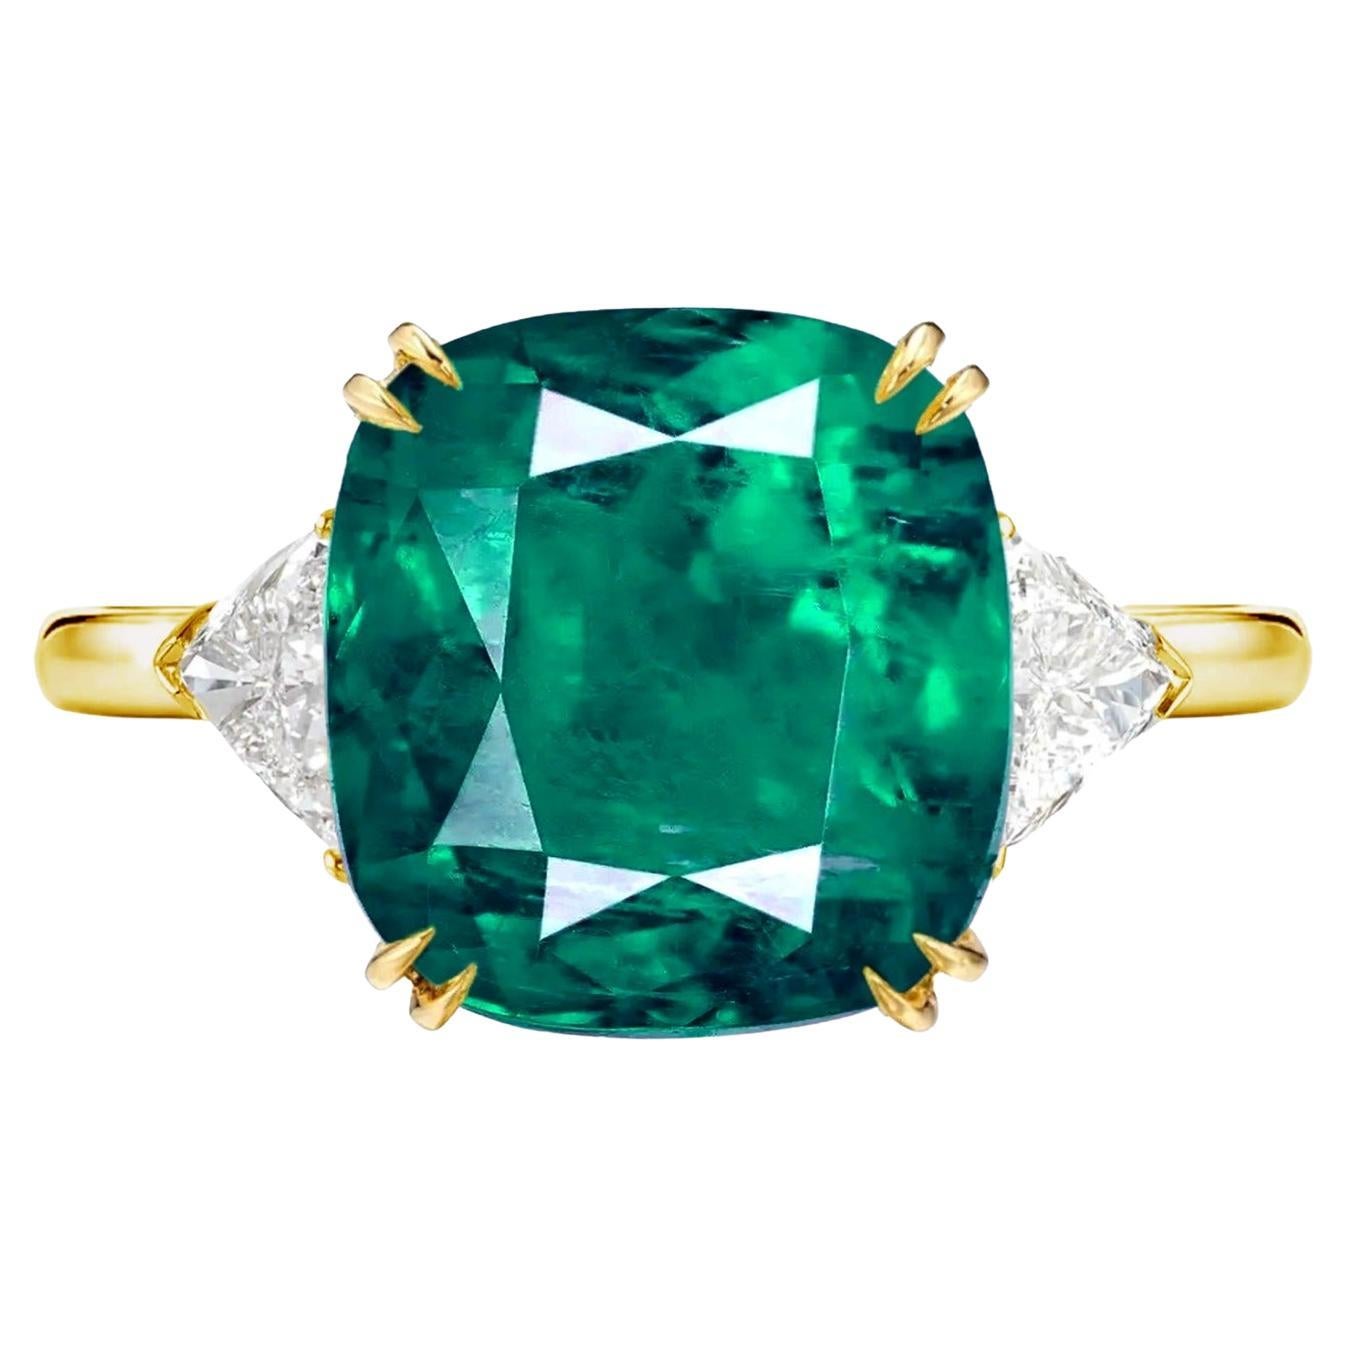 GRS Switzerland 3.25 Carat Colombian Emerald Diamond Ring Made in Italy For Sale